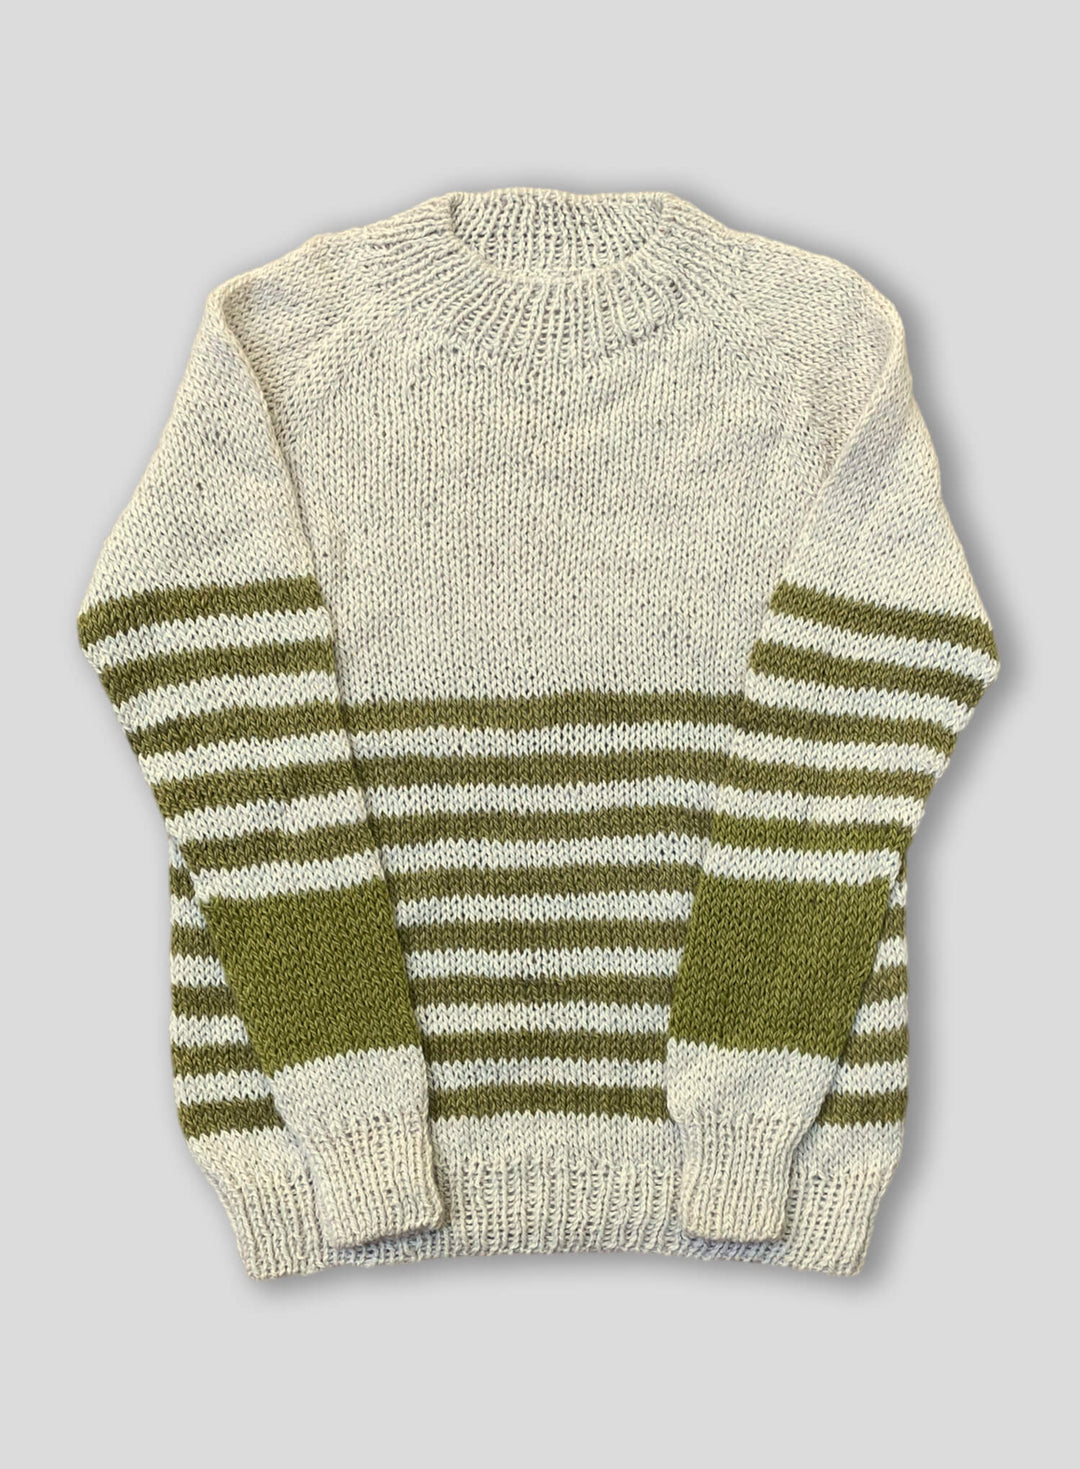 White and Green Hand-Knitted Llama Sweater